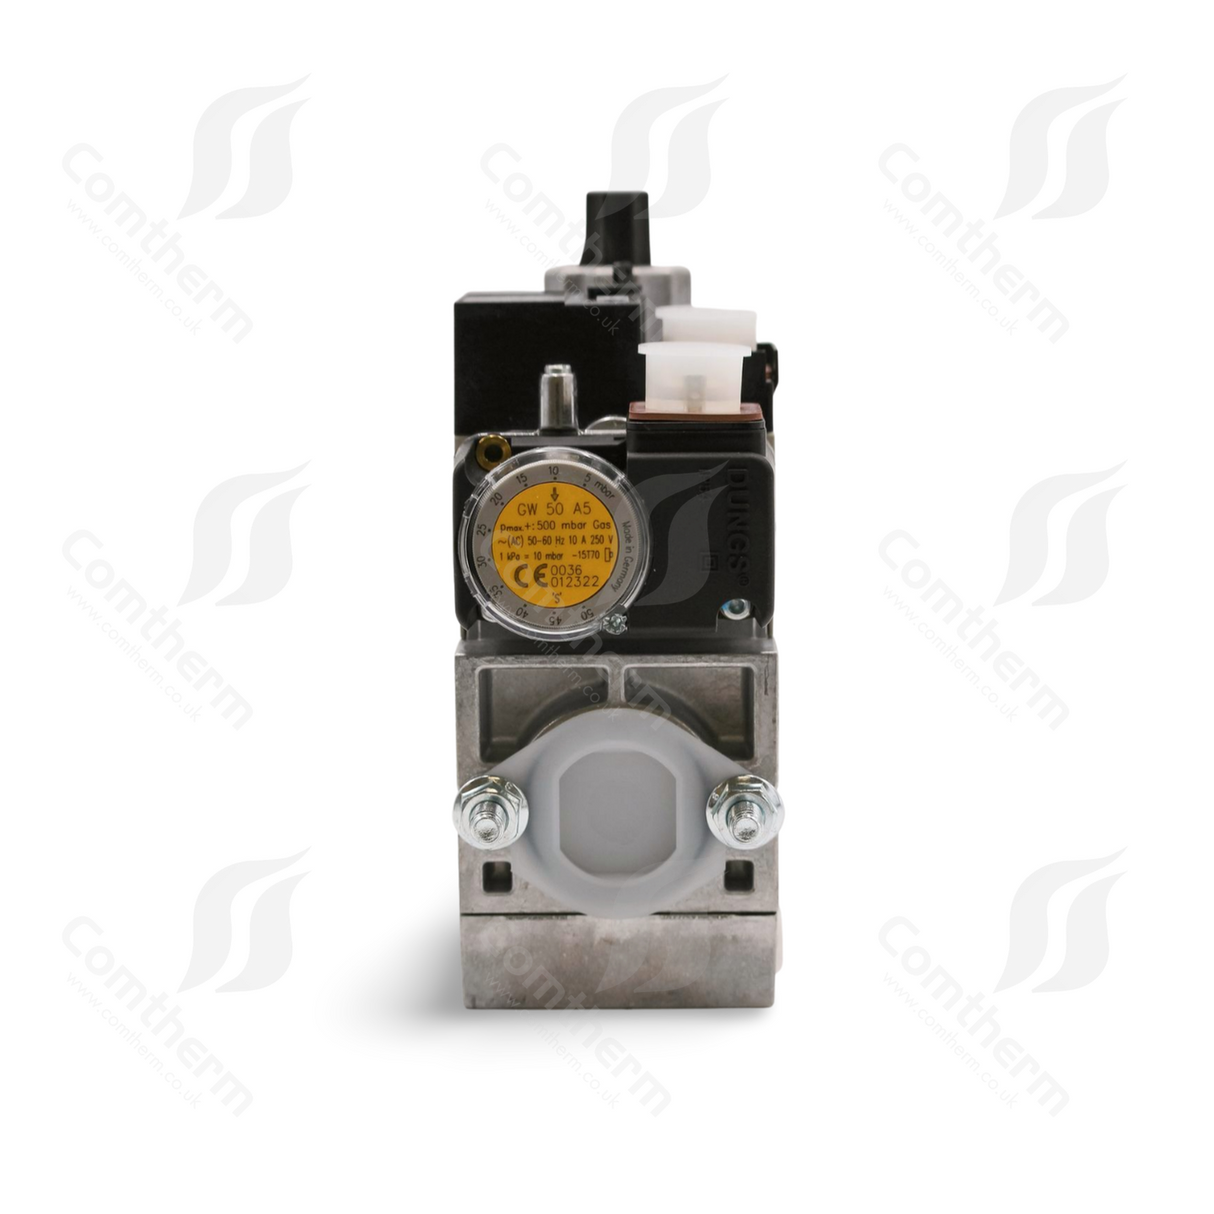 Dungs MB-DLE 410 B01 S50 + GW150A5 Multibloc Gas Valve - 230v